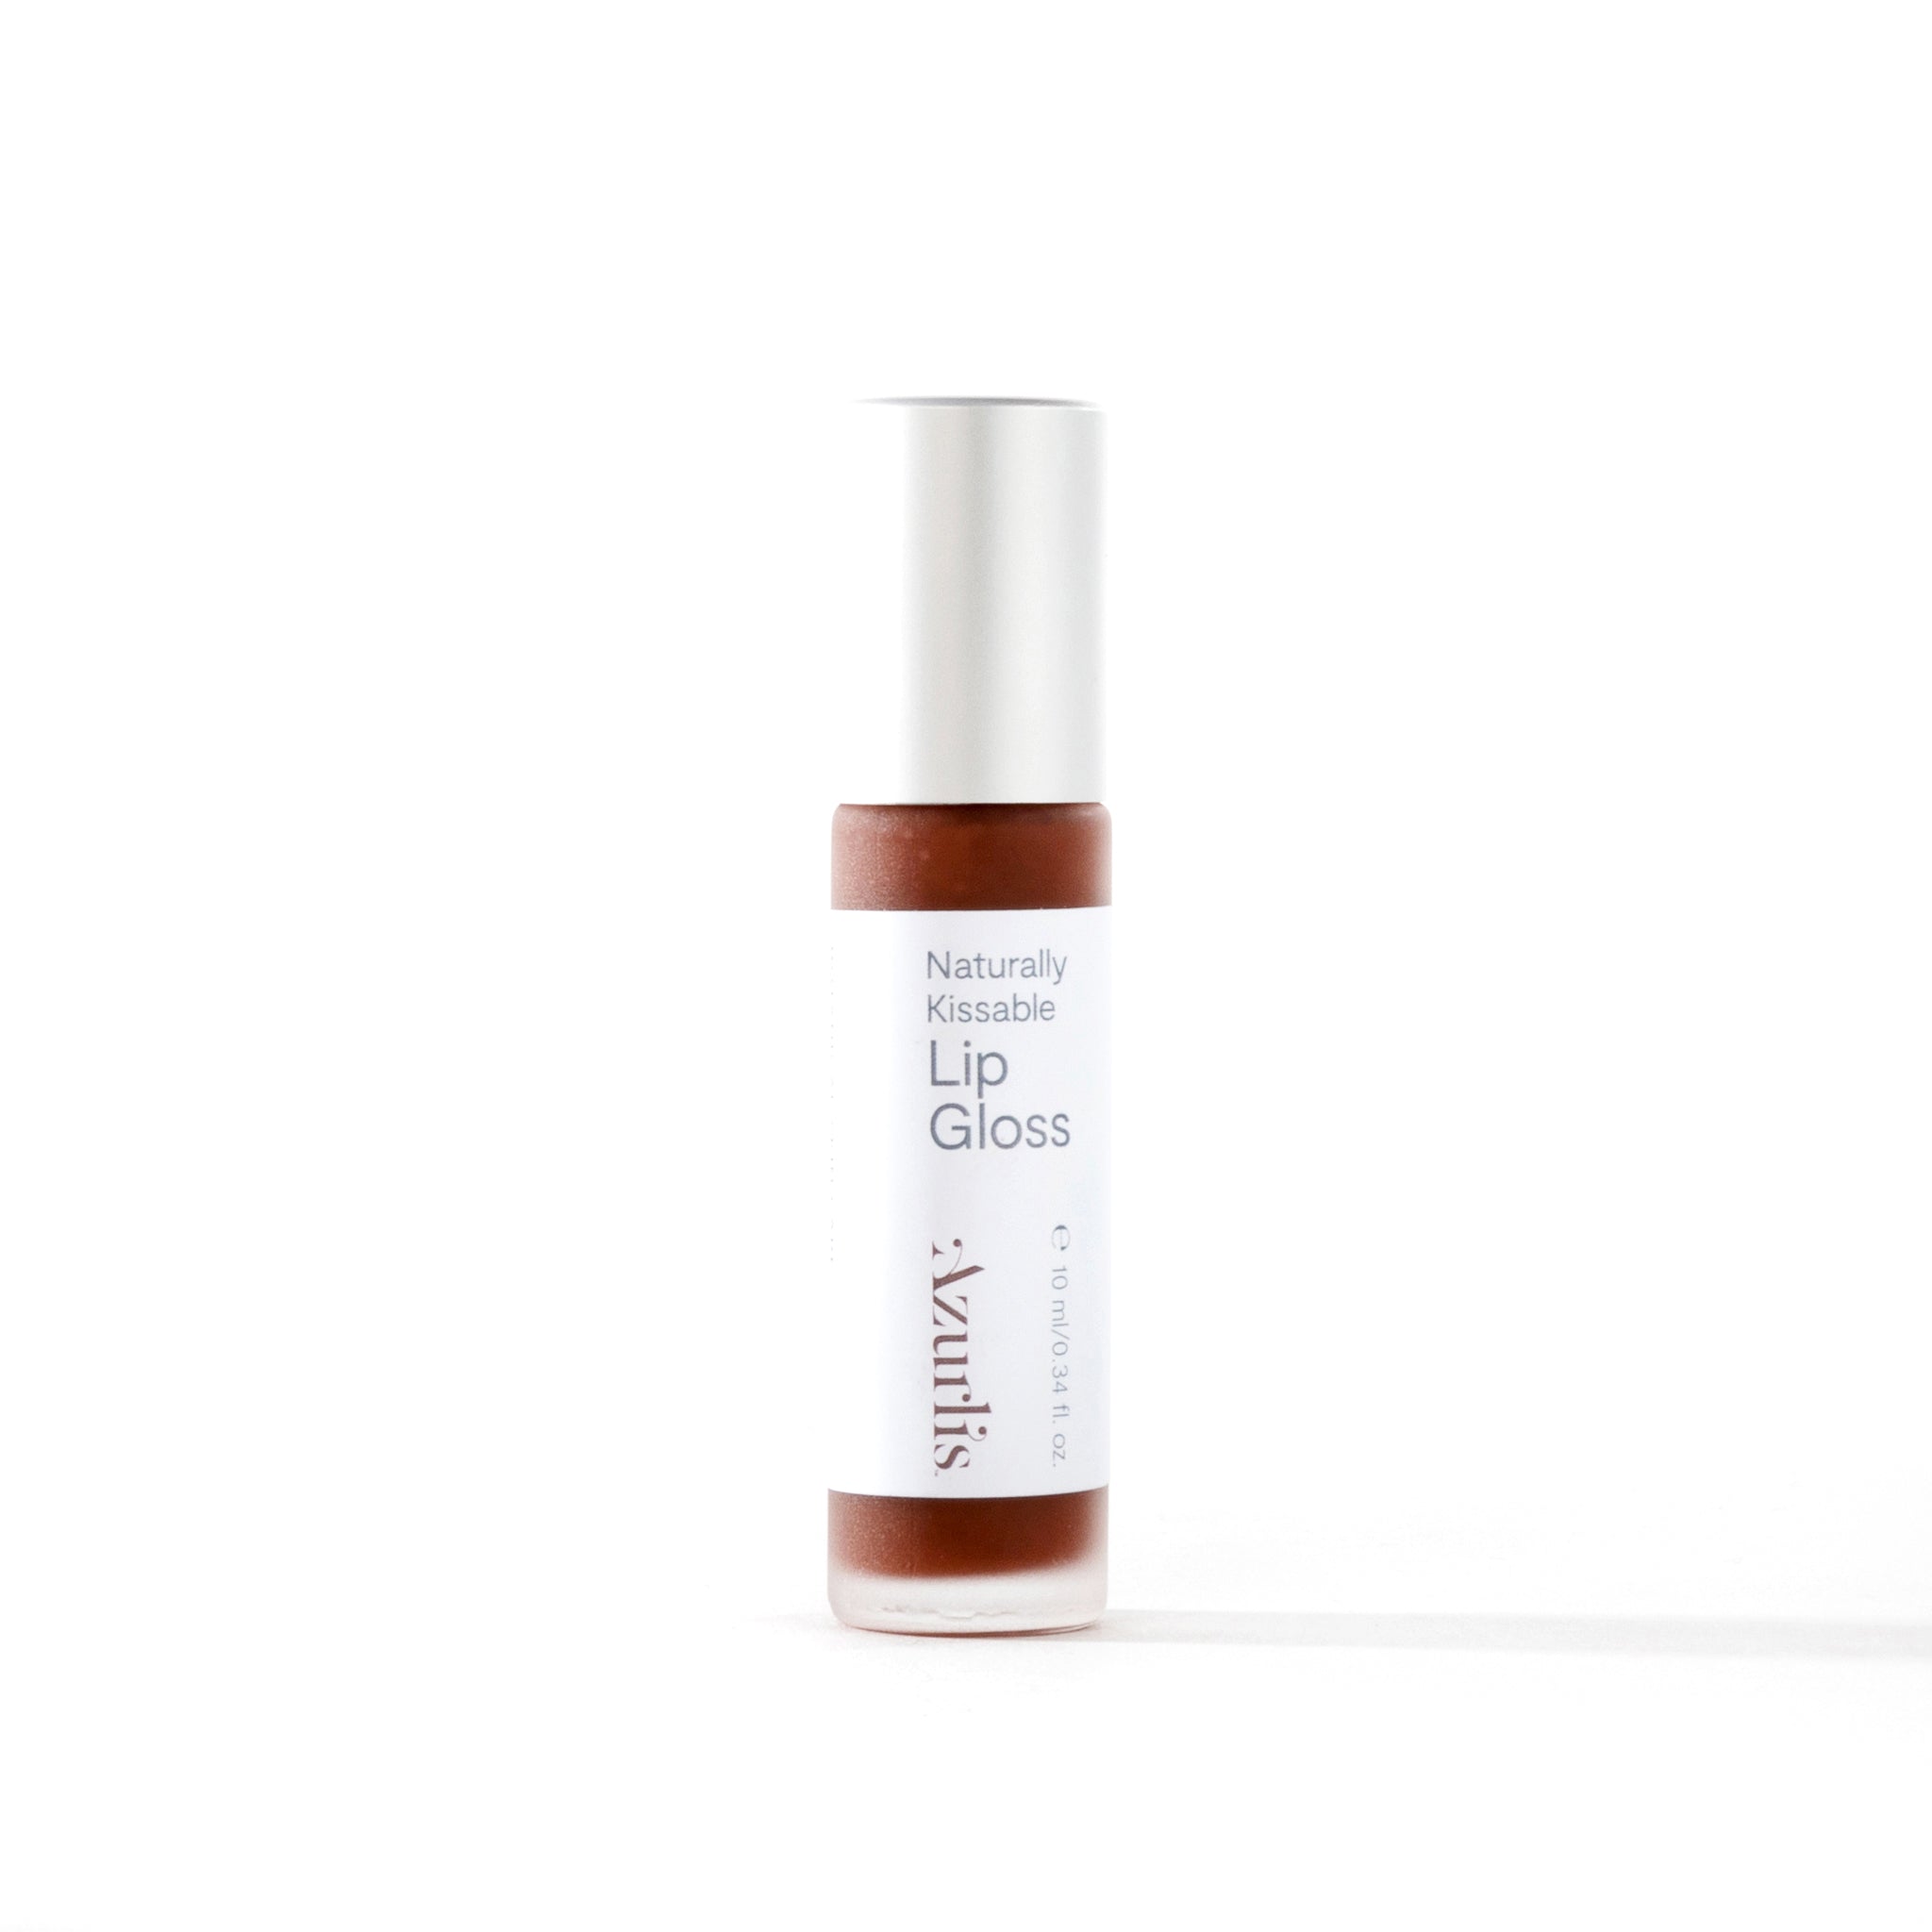 Azurlis™ Naturally Kissable Lip Gloss 10ml This is truly natural lip gloss with a subtle cocoa butter and coconut flavours. Silky smooth with a deep sunset glow. SPF8.